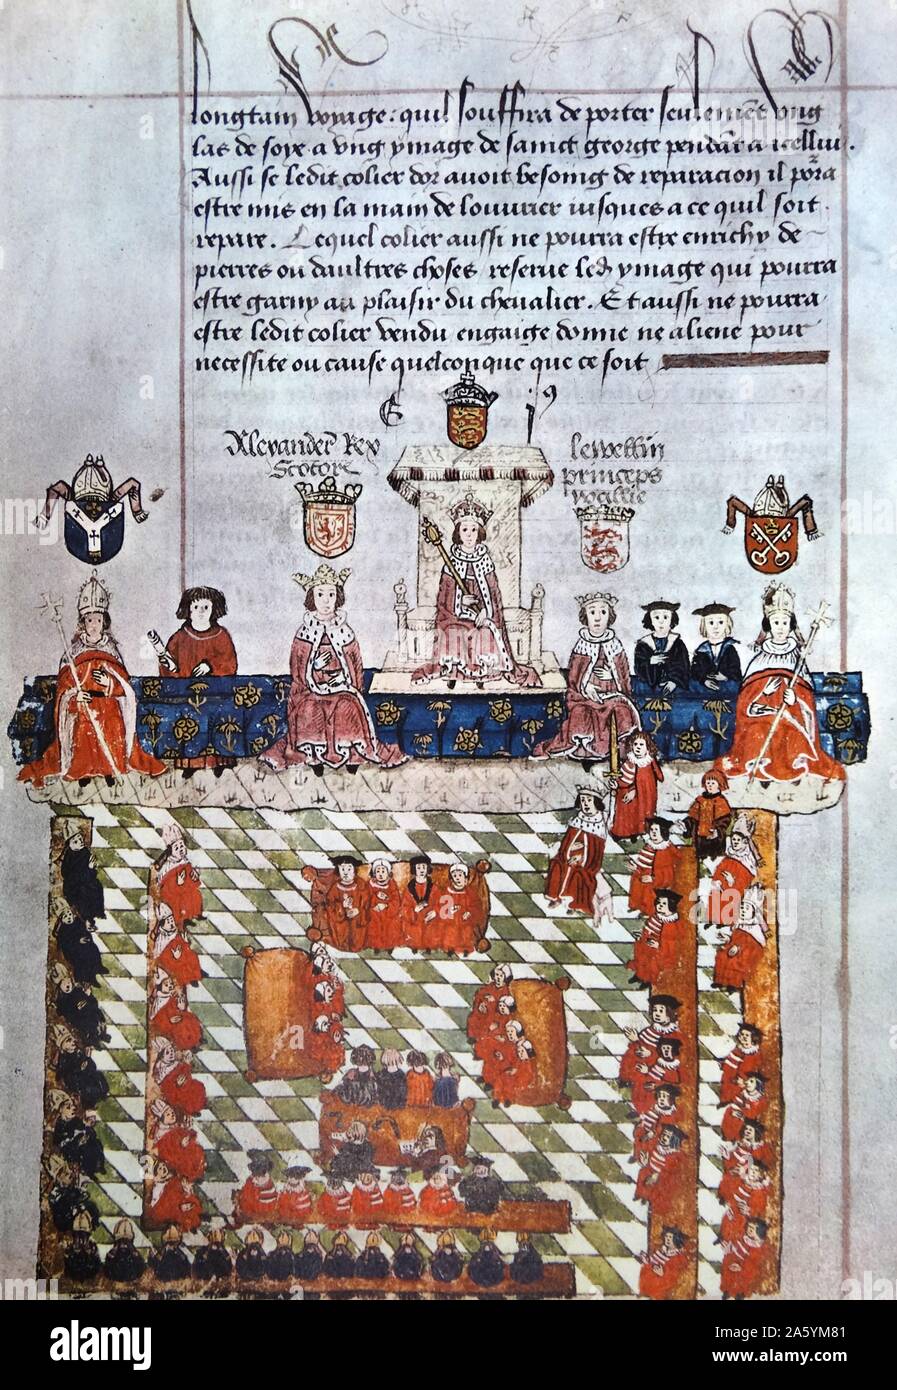 Edward I in Parliament with the Archbishop of Canterbury, King Alexander III of Scotland, the Welsh Prince Llywelyn ab Gruffydd and the Archbishop of York. From the Wriothesley MS, 1523. From The Island Race, a 20th century book that covers the history of the British Isles from the pre-Roman times to the Victorian era. Written by Sir Winston Churchill and abridged by Timothy Baker. Stock Photo